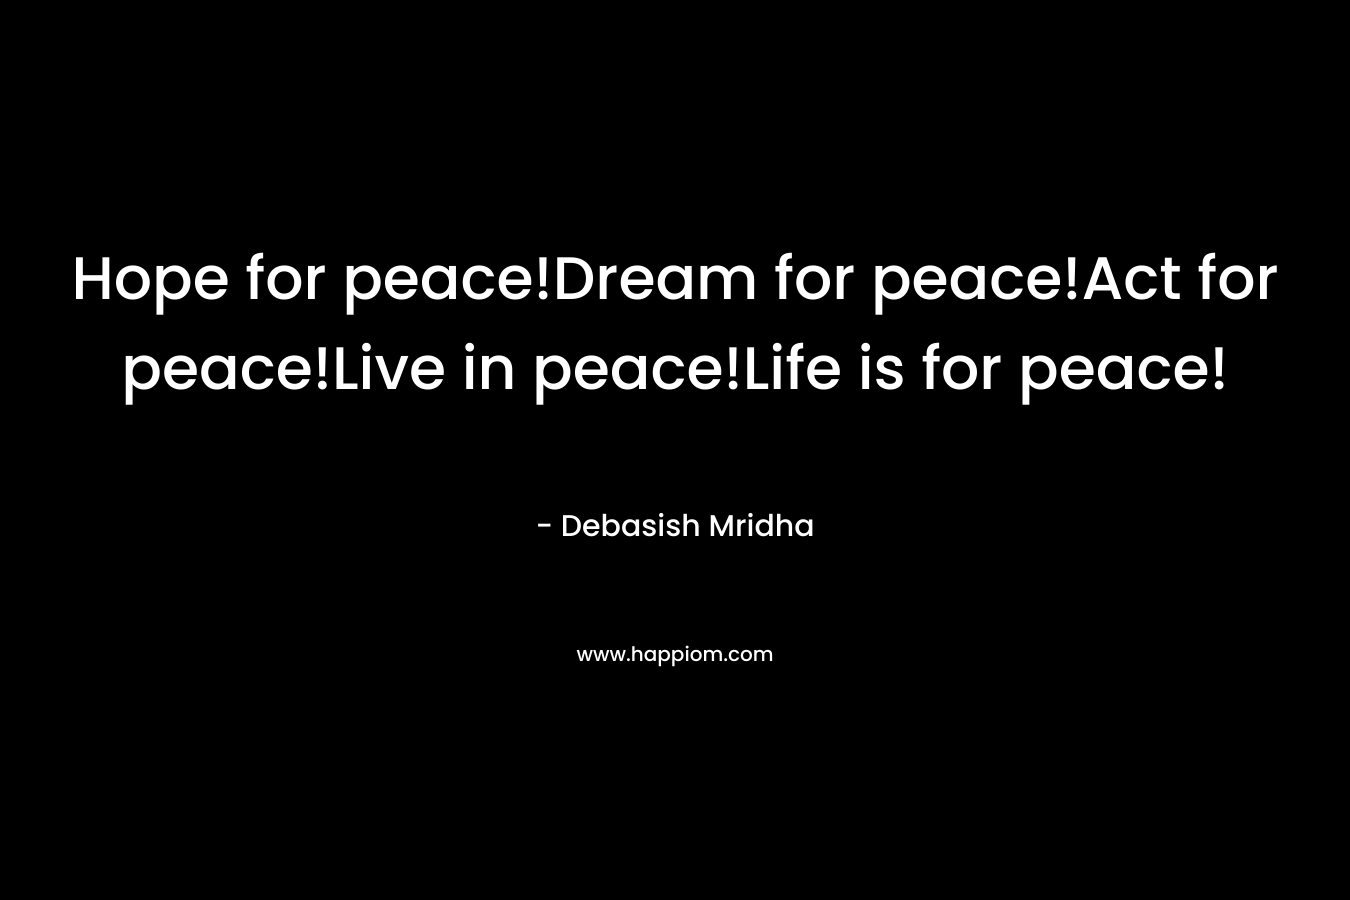 Hope for peace!Dream for peace!Act for peace!Live in peace!Life is for peace!